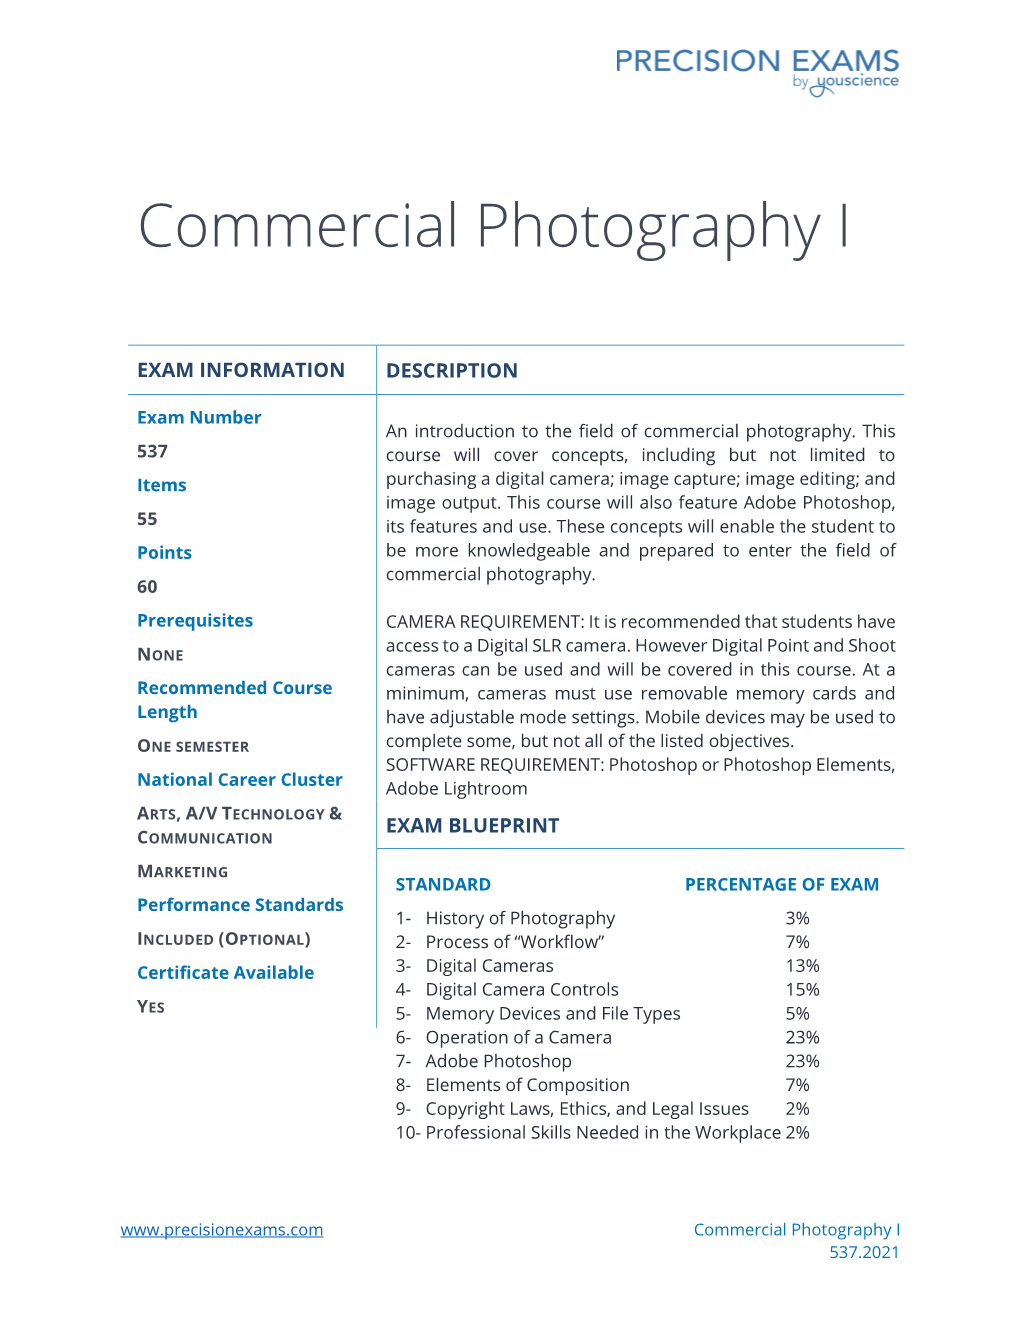 Commercial Photography I